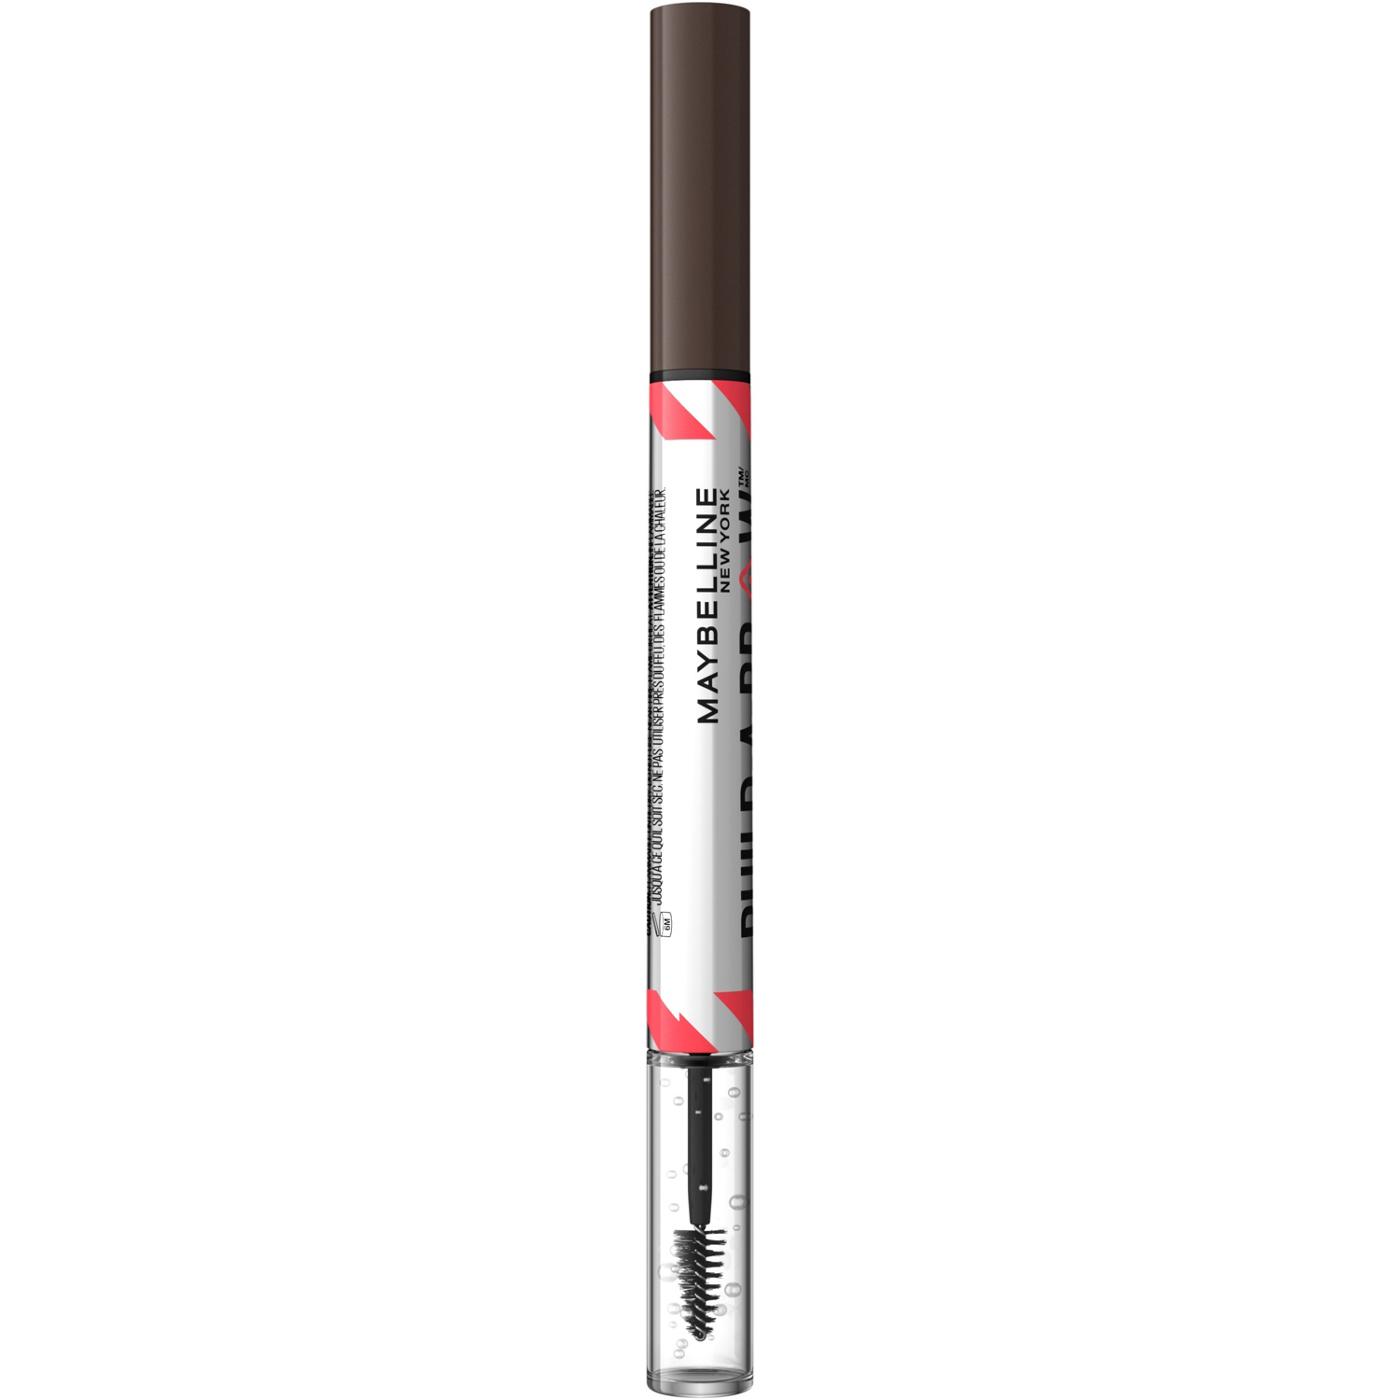 Maybelline Build A Brow 2 In 1 Brow Pen - Deep Brown; image 14 of 17